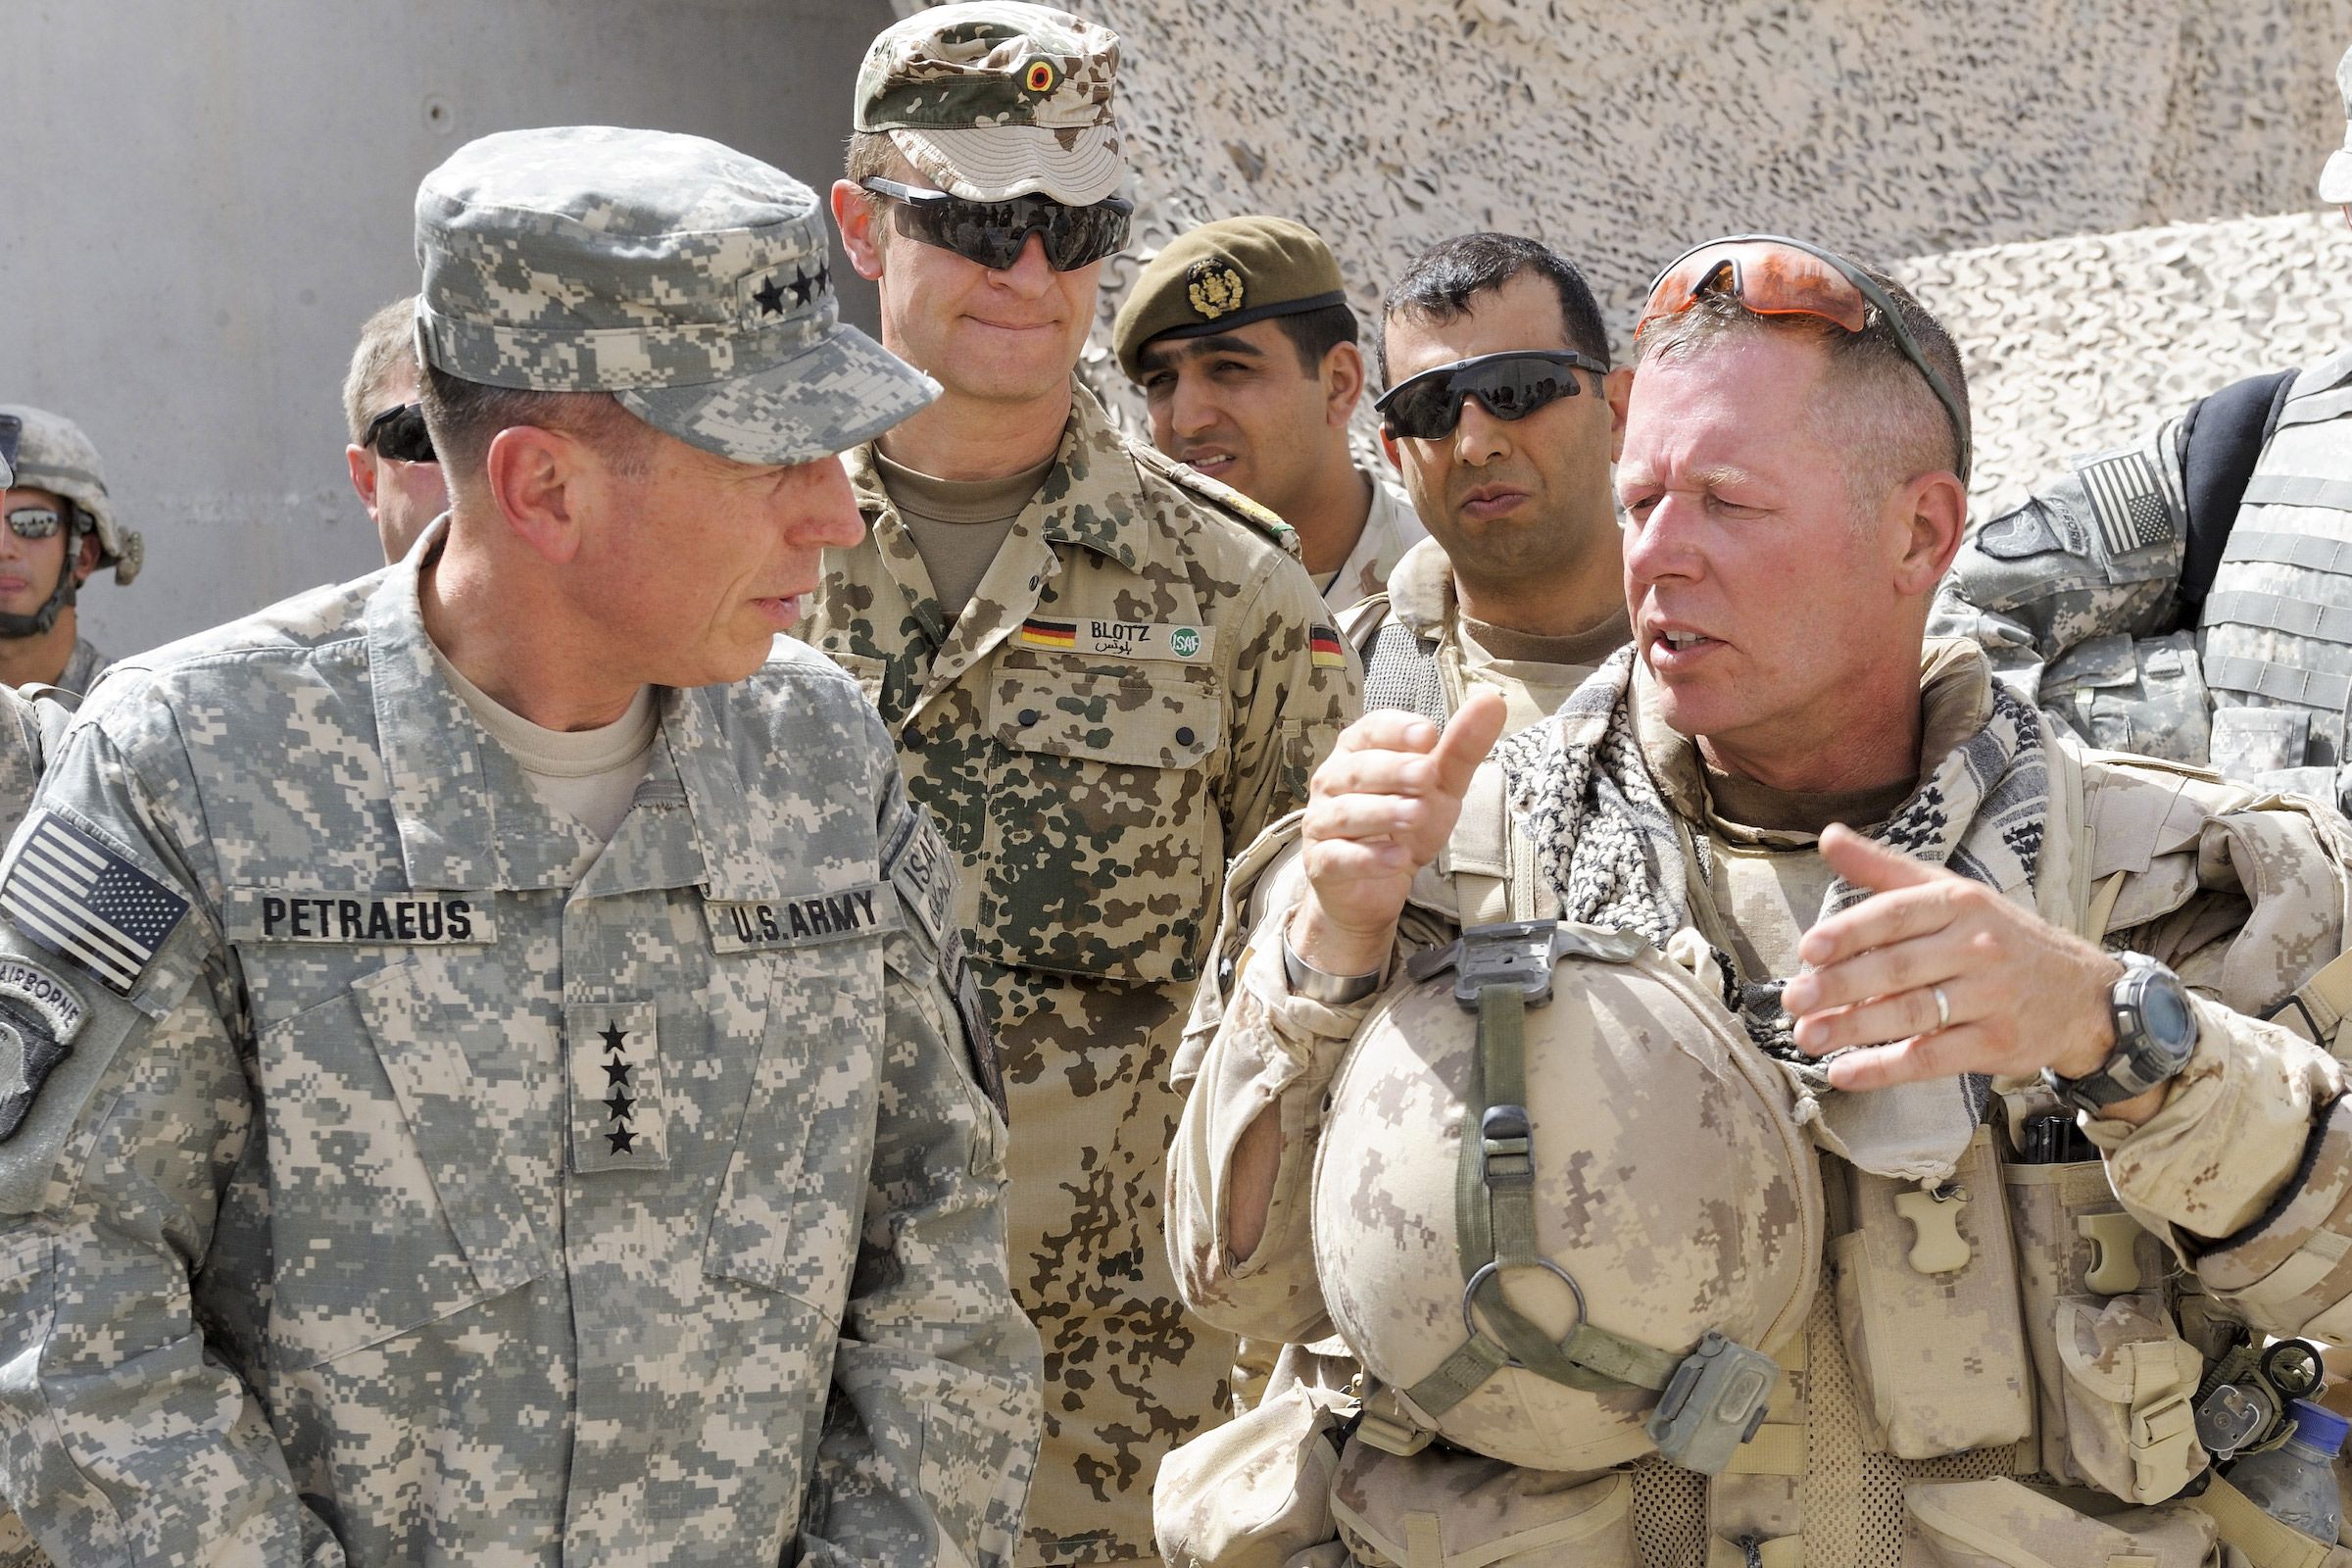 David Petraeus Flawed in civilian life, useful on the battlefield National Post pic